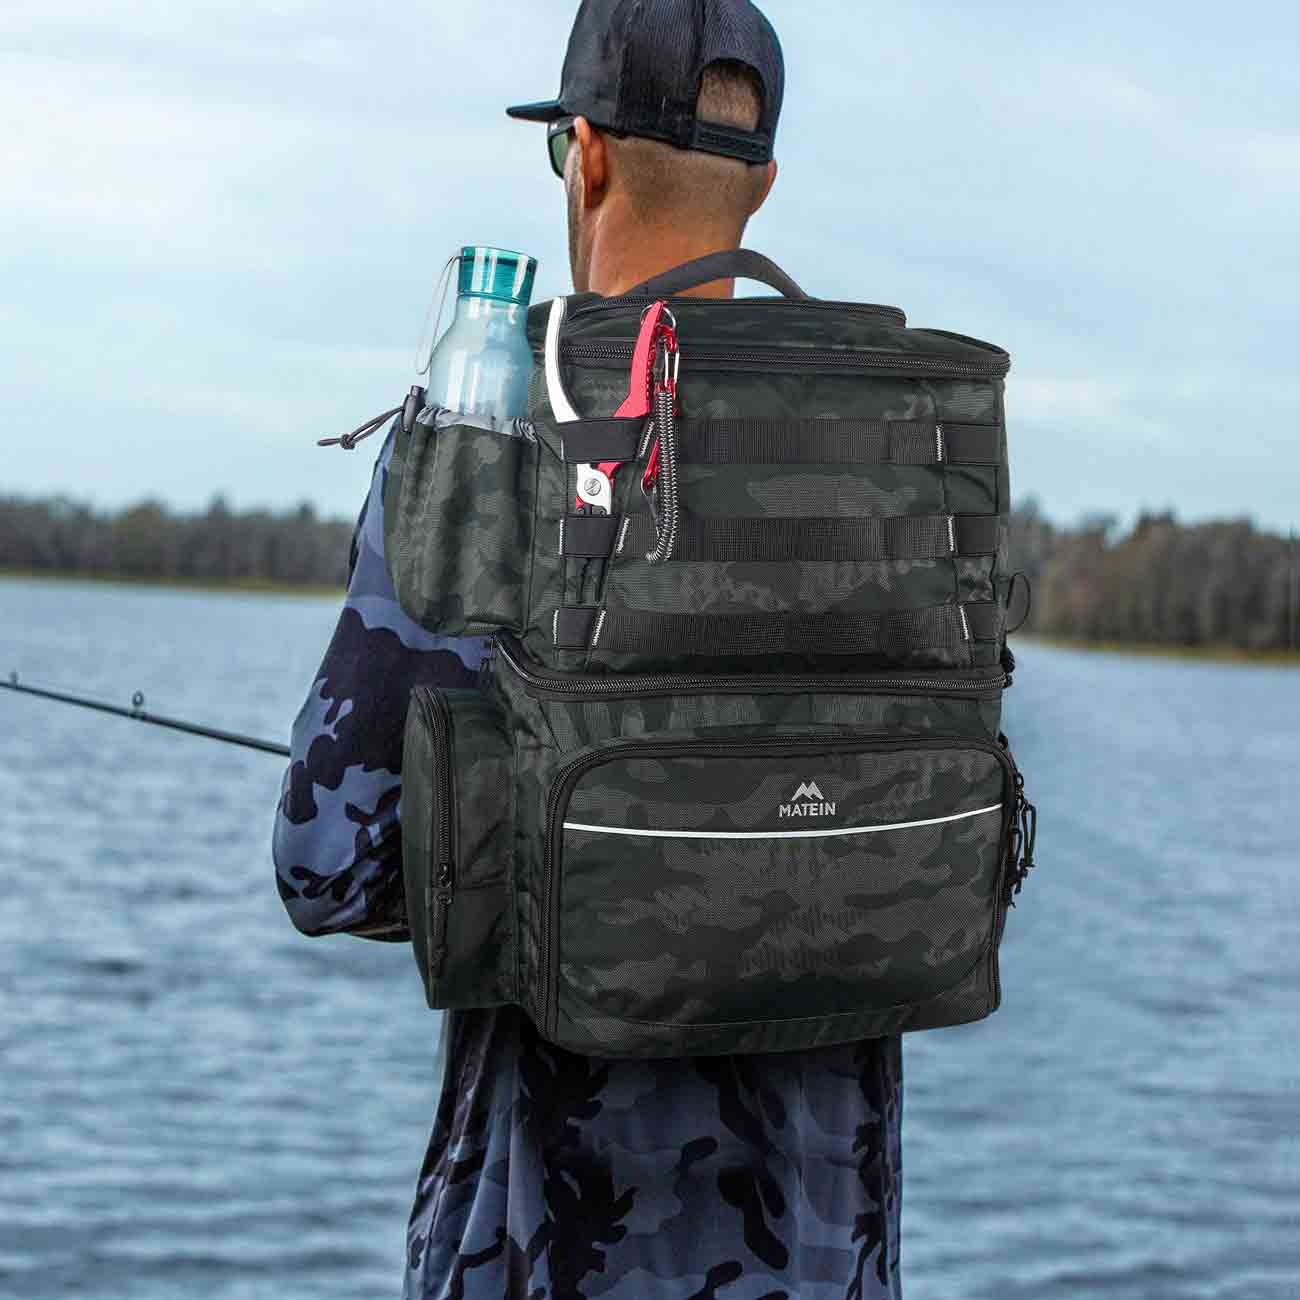 Buy MATEIN Tackle Bag with Cooler & Rod Holder, Fishing Gifts for